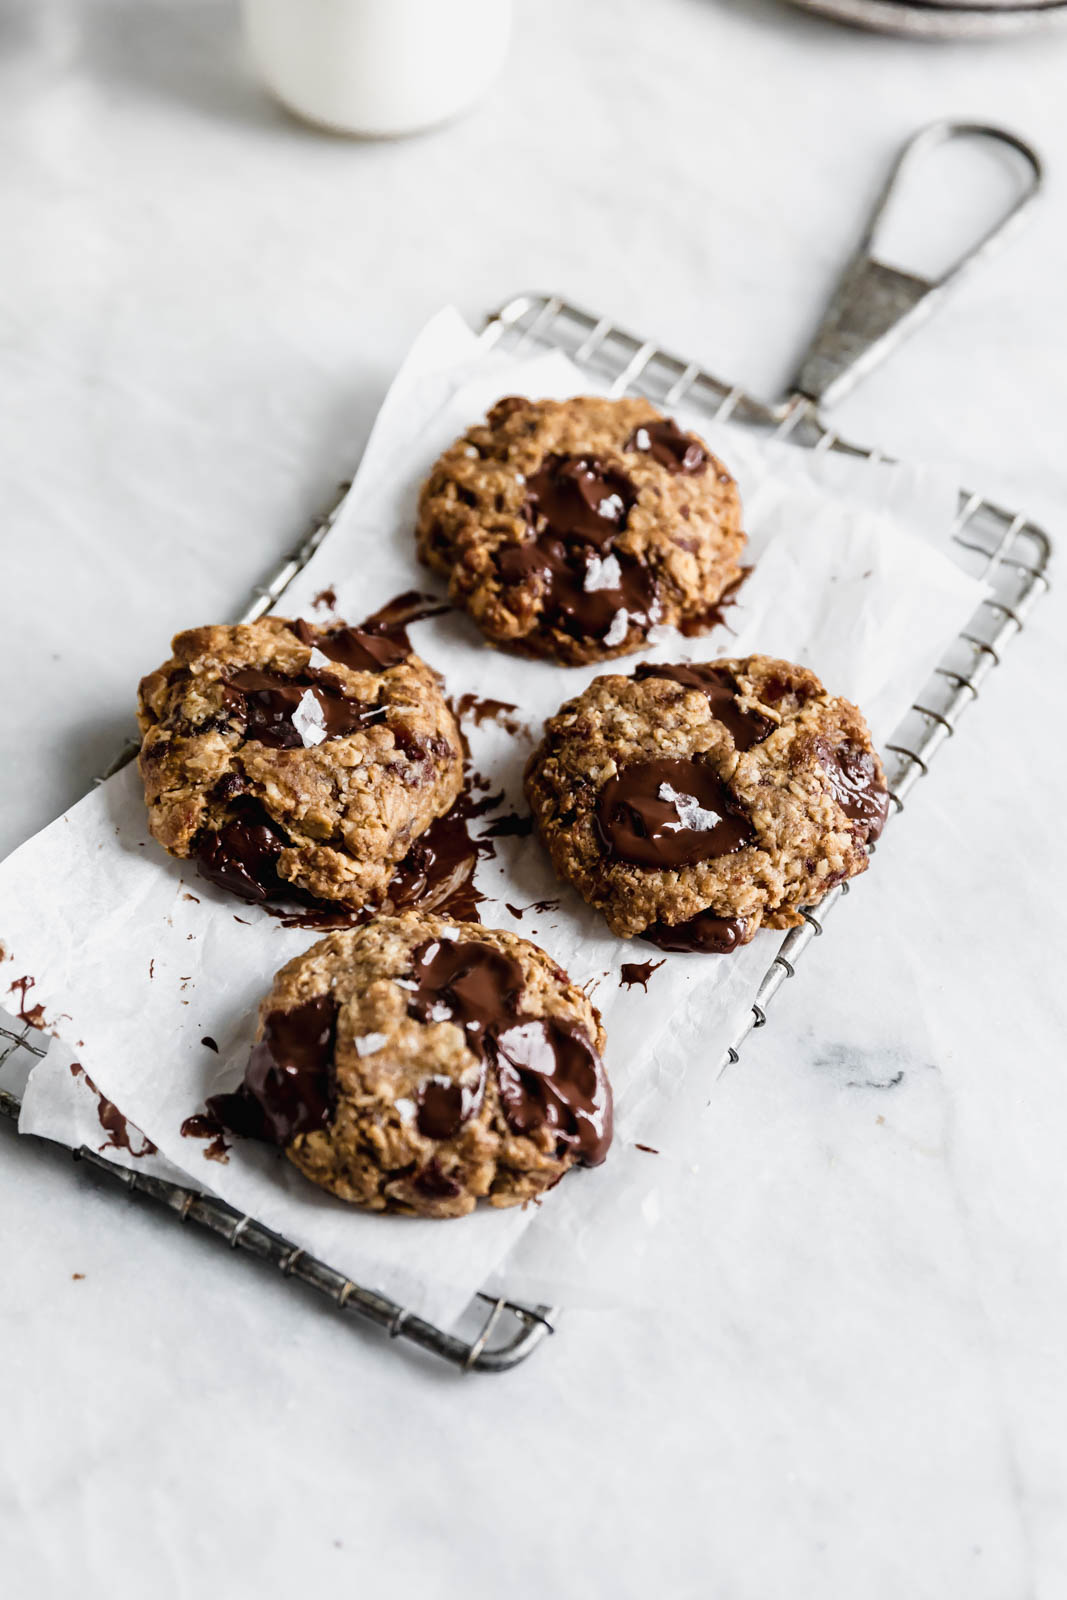 Yes these Tahini Oatmeal Chocolate Chunk Cookies are vegan, gluten free, and refined sugar free, but they sure as heck don't taste like health food. DROOL.